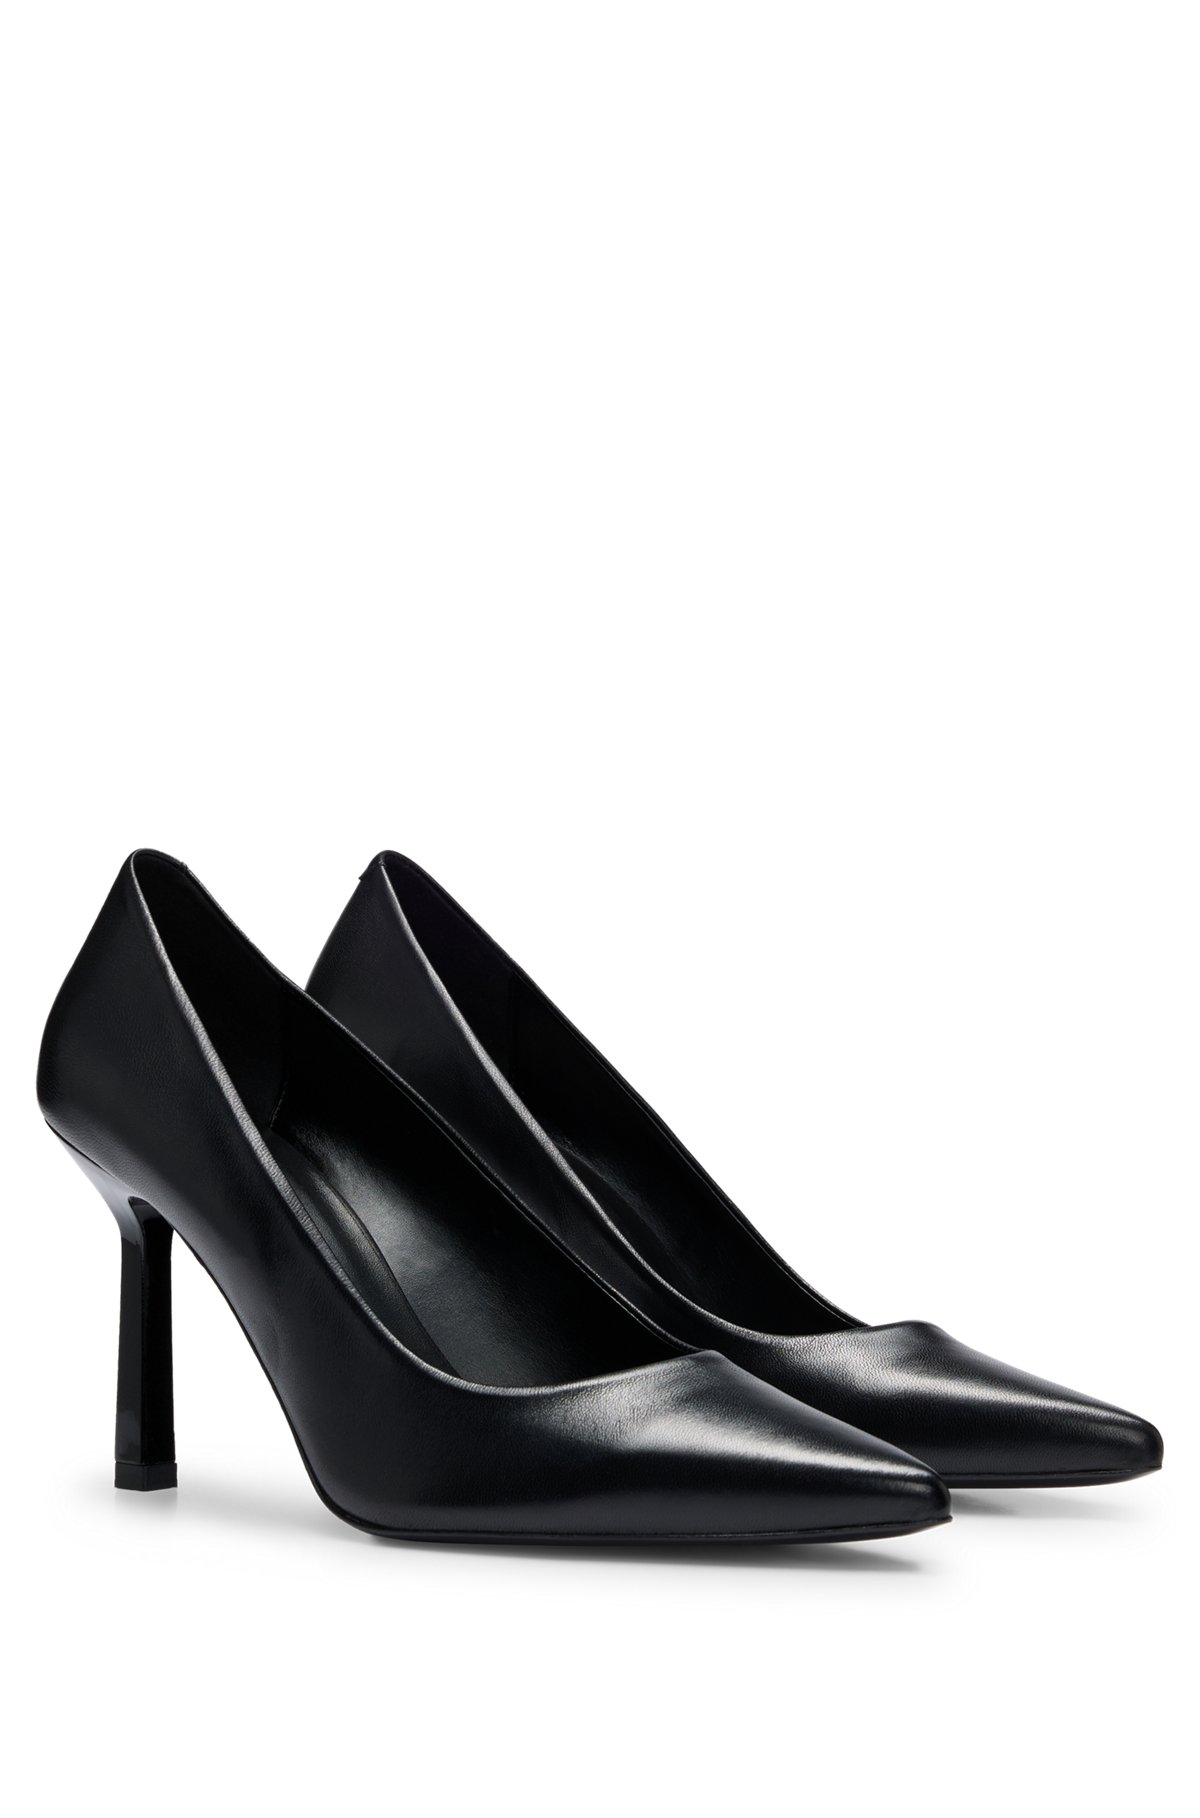 HUGO - Pointed-toe pumps in nappa leather